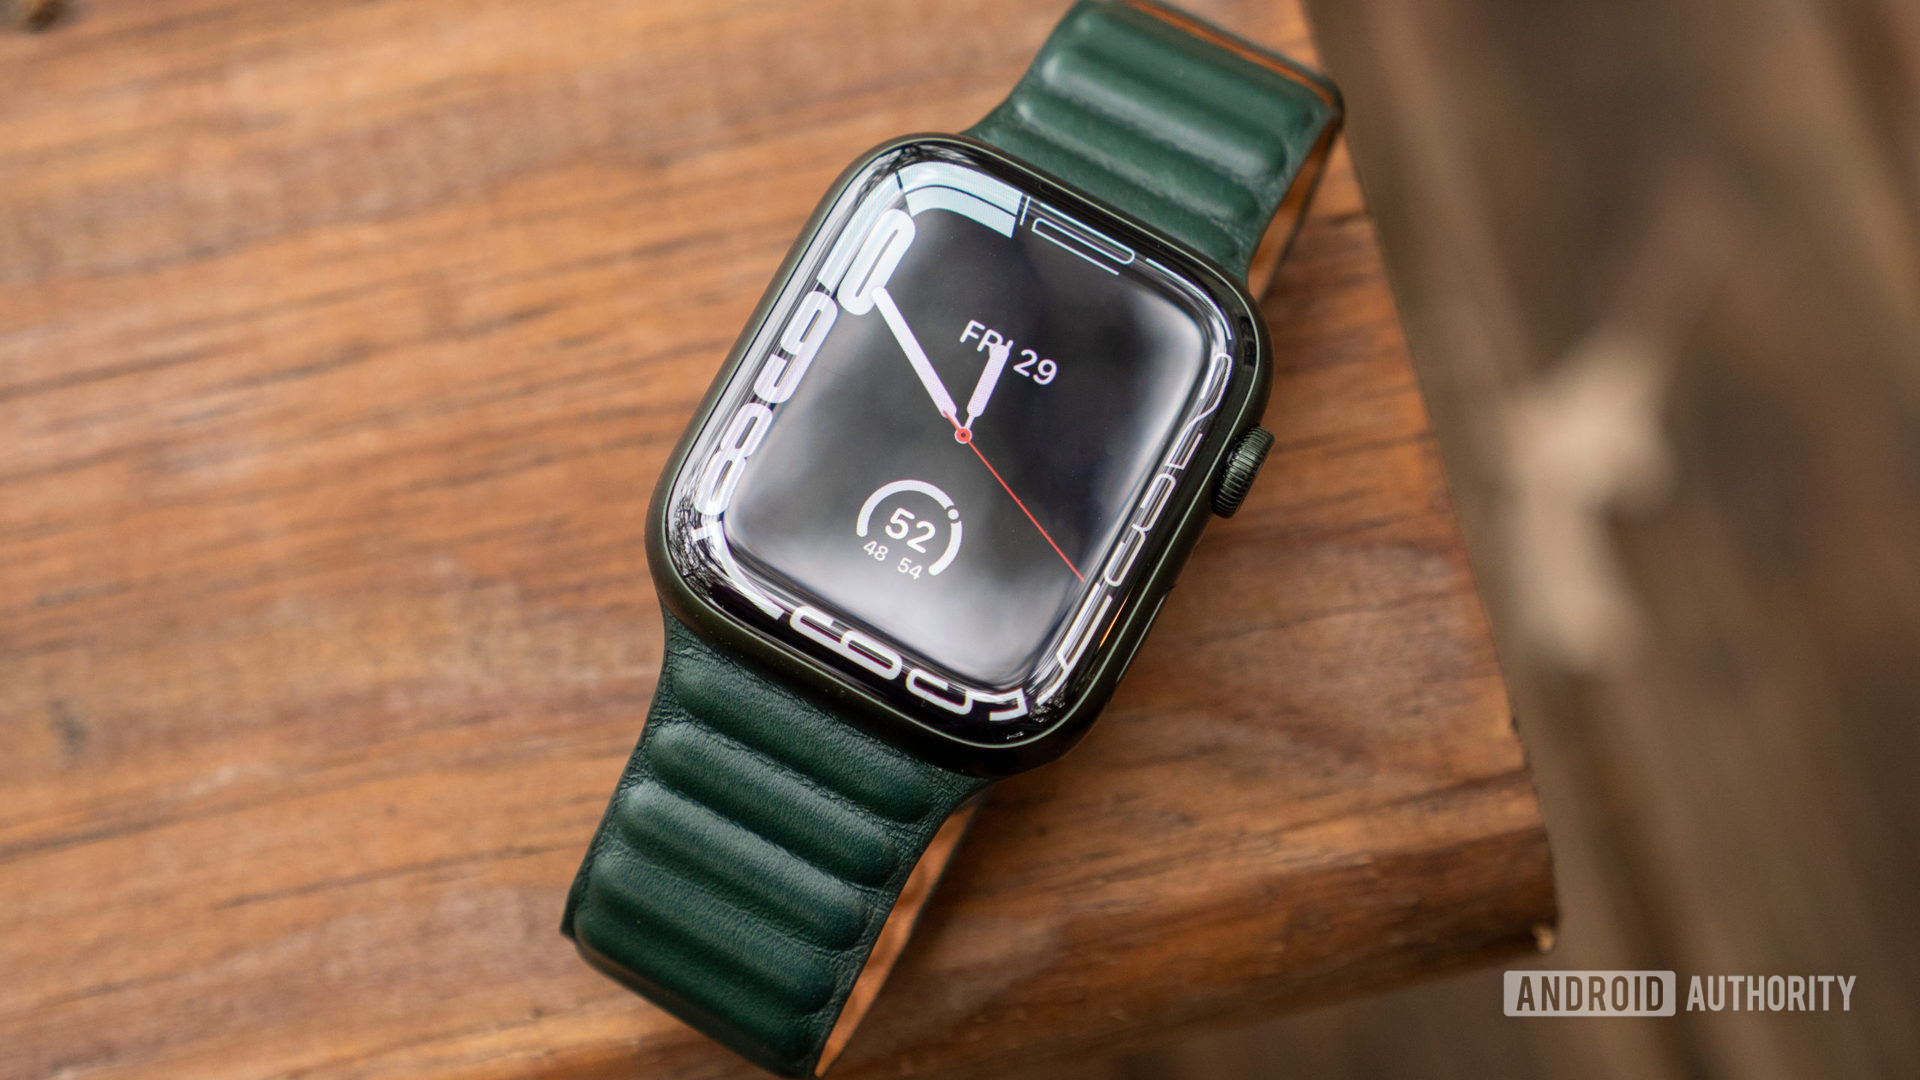 An image of the Apple Watch Series 7 showing the Contour watch face on a table